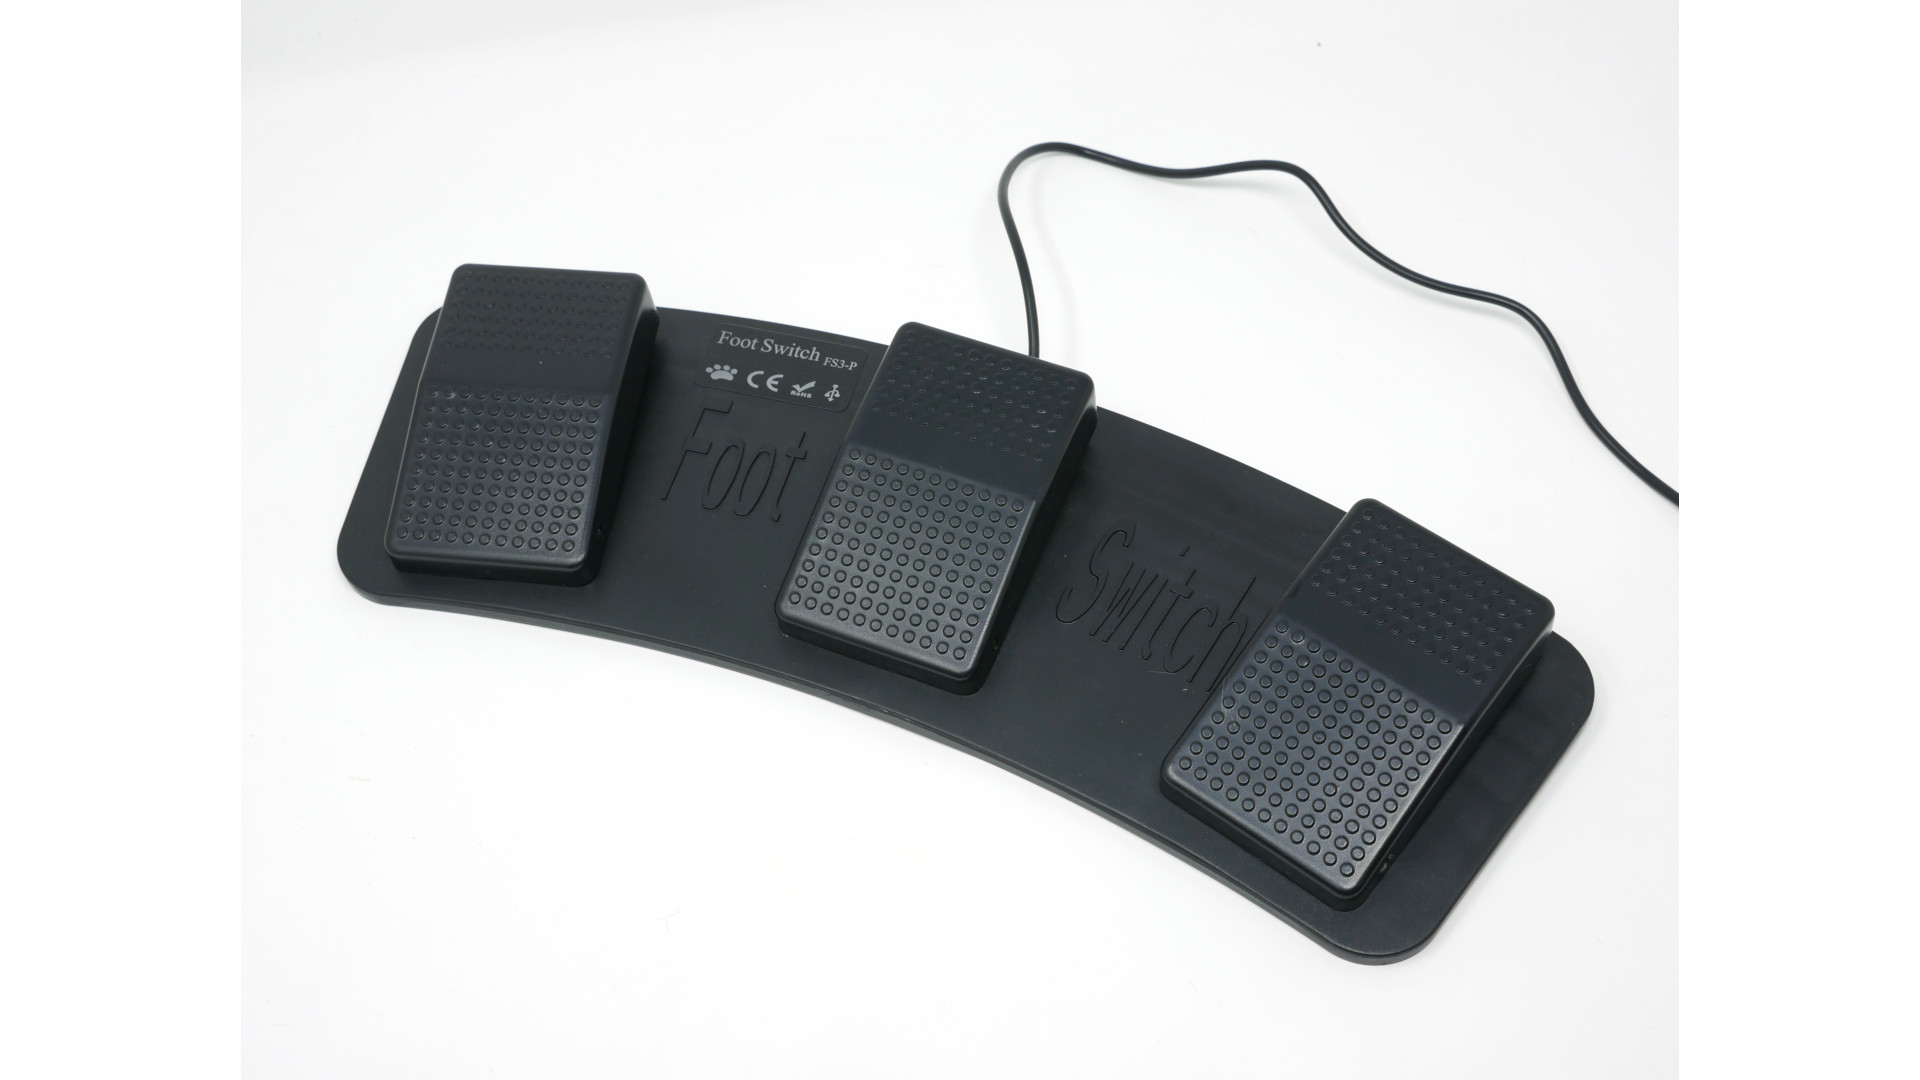 Foot pedals for games